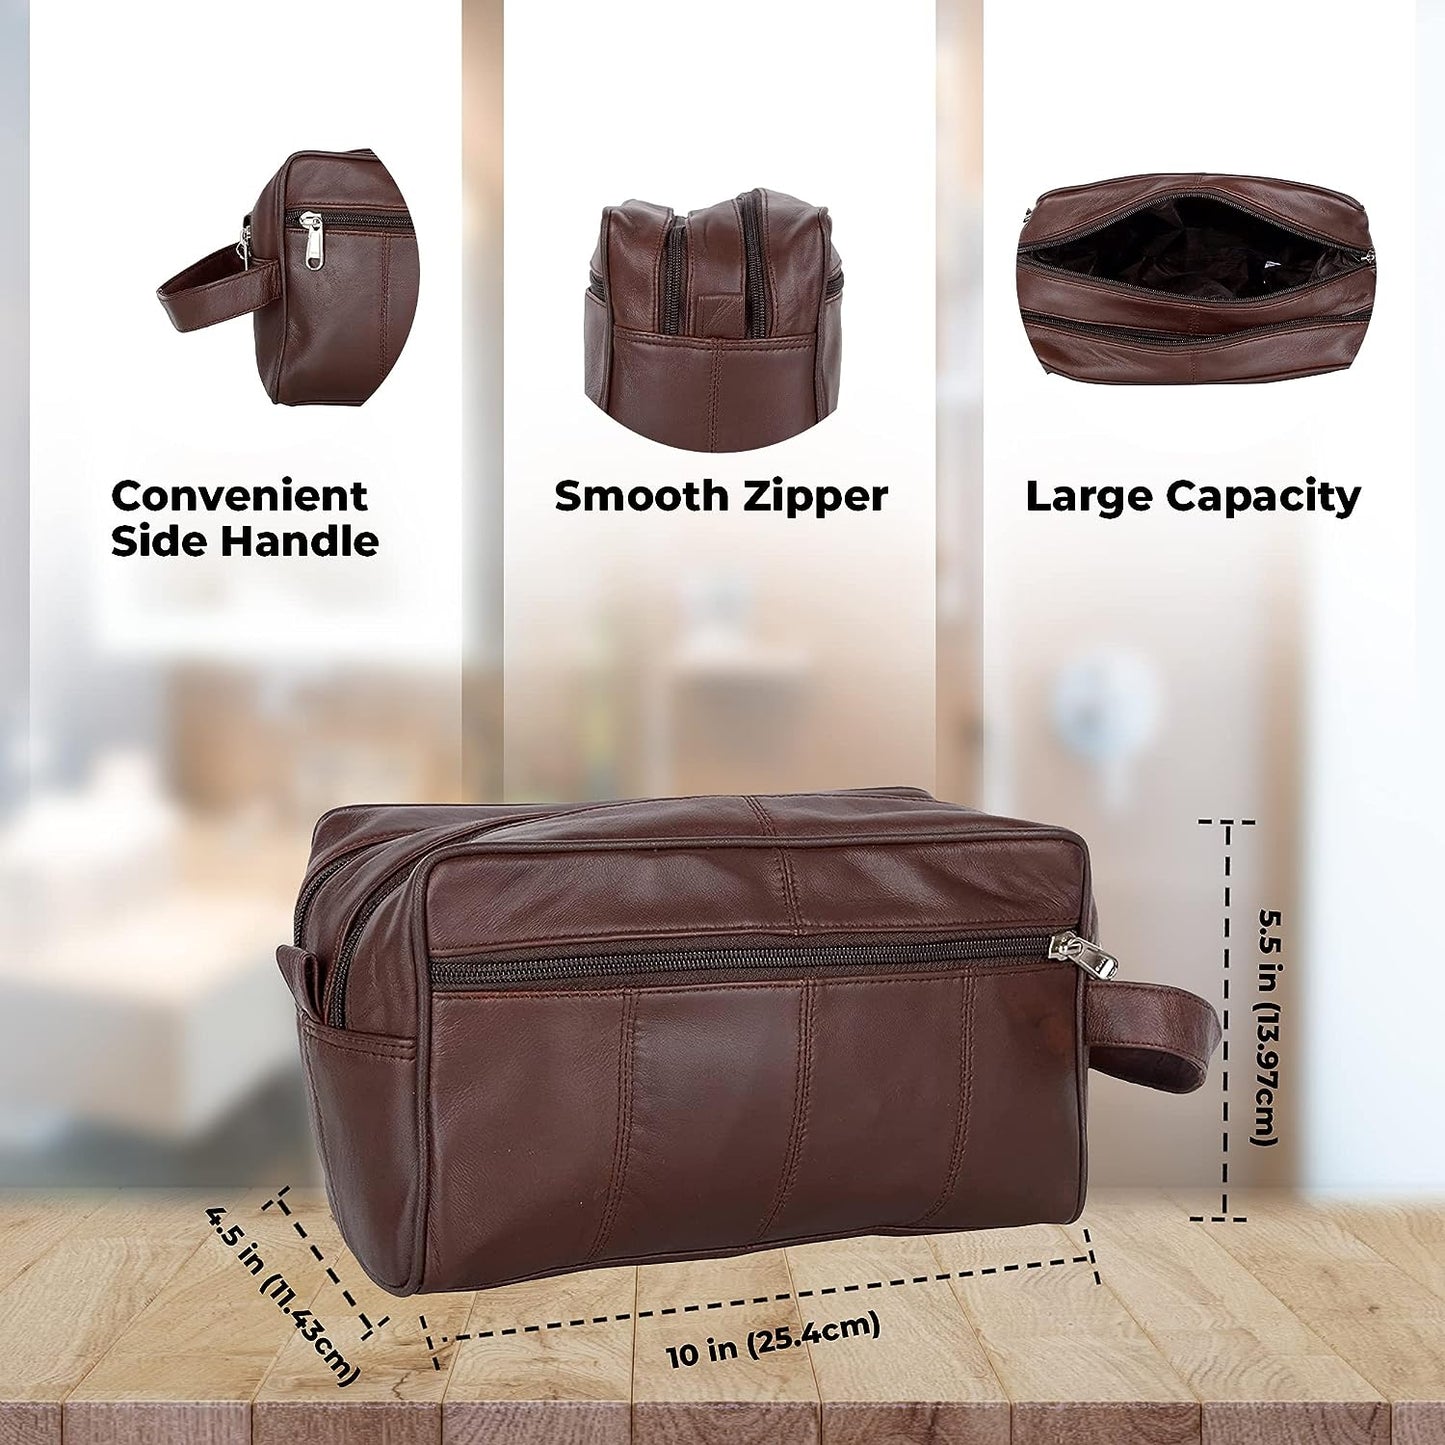 Brown Deluxe Sheep Napa Leather Unisex Toiletry Travel Bag Bathroom Organizer and Shaving Kit Portable Cosmetic Case and Traveling Leather Shaving Bag